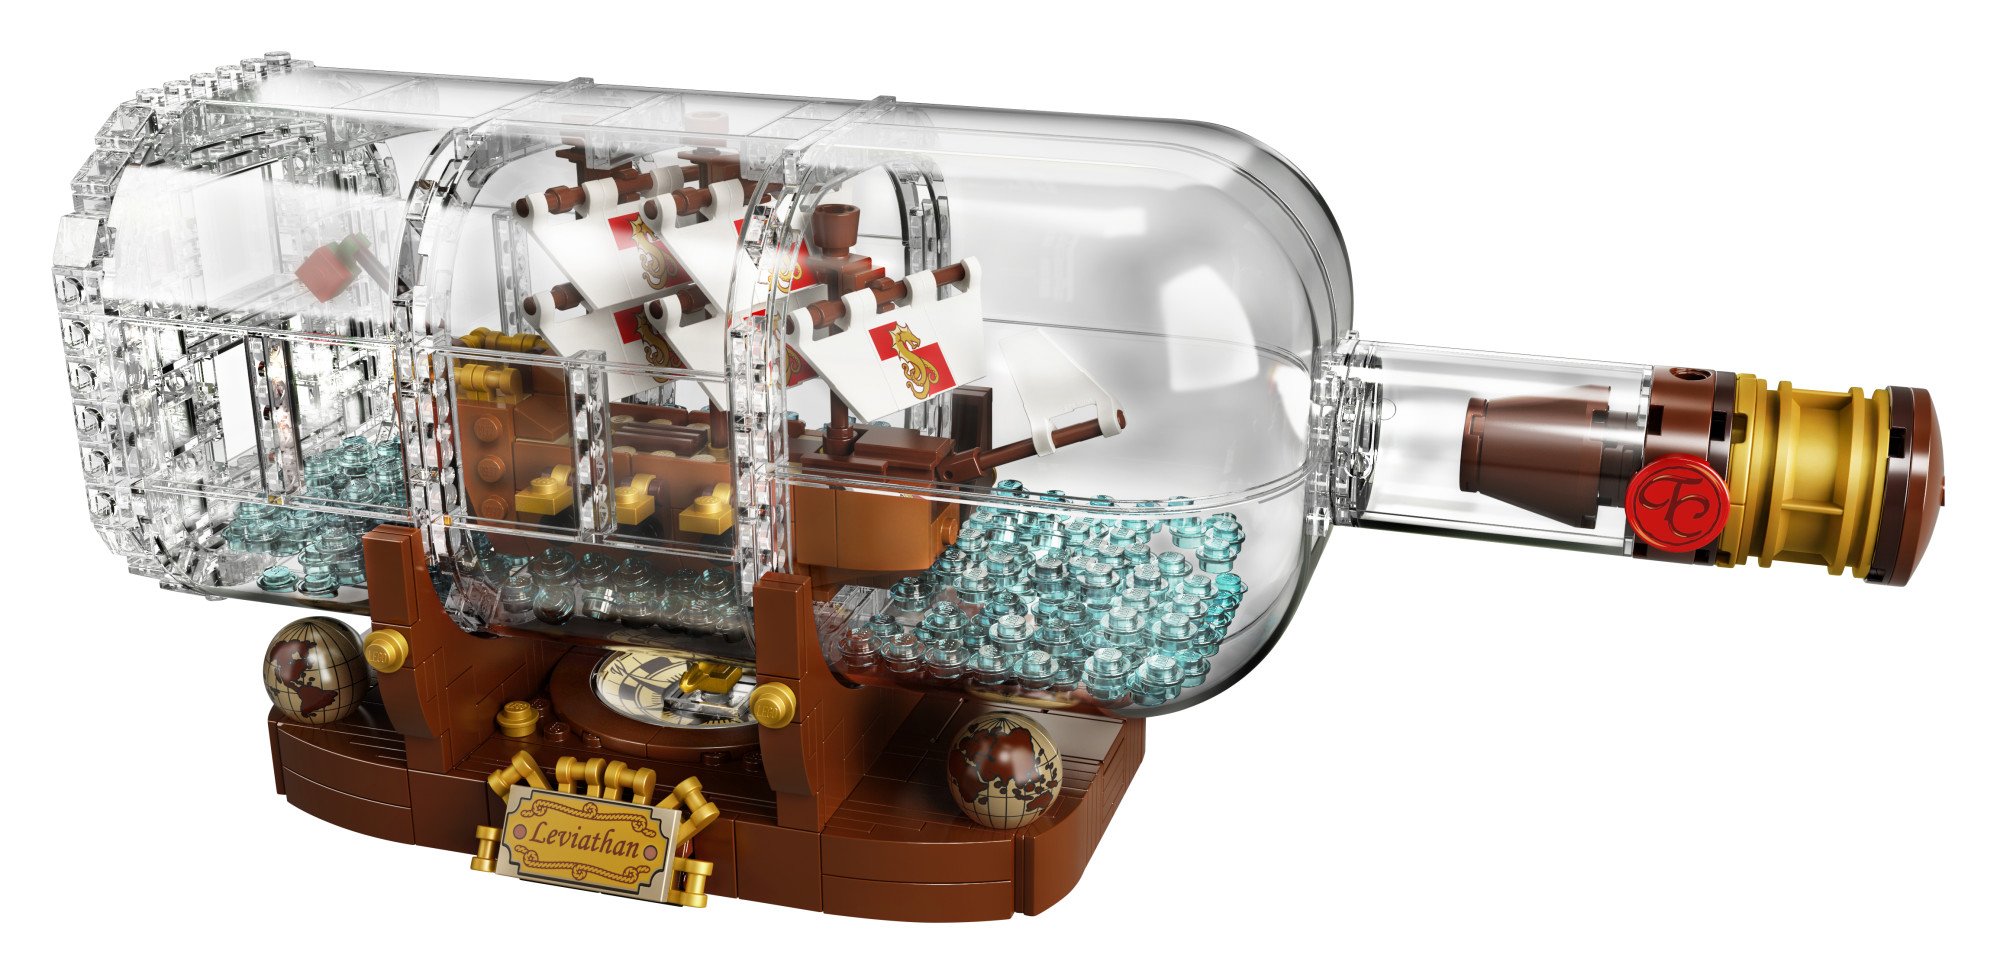 LEGO Ideas Ship in a Bottle 92177 Expert Building Kit, Snap Together Model Ship, Collectible Display Set and Toy for Adults (962 Pieces),Multicolor